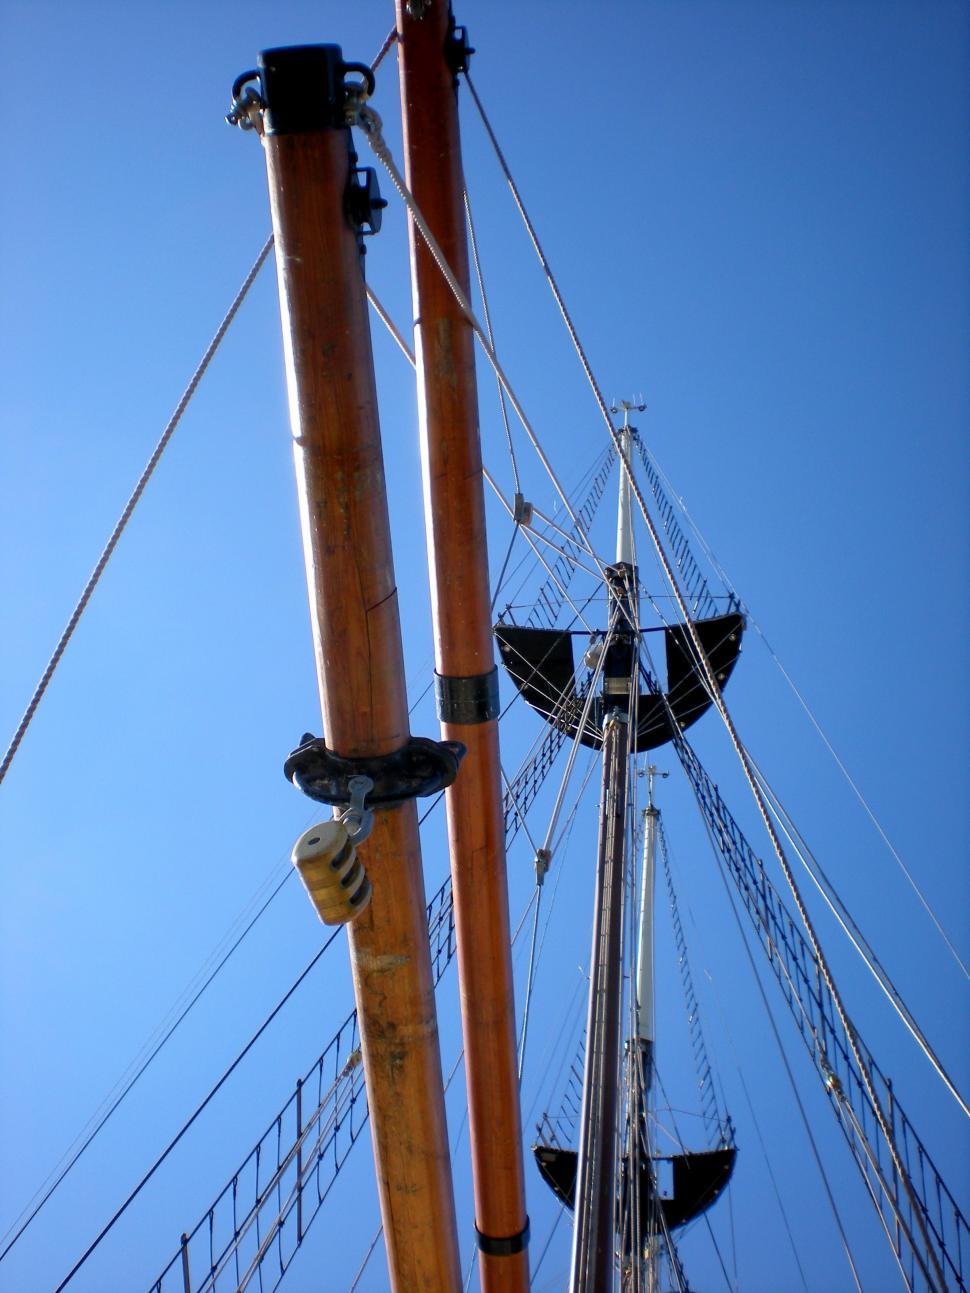 Free Image of Mast of a Tall Ship Against a Blue Sky 